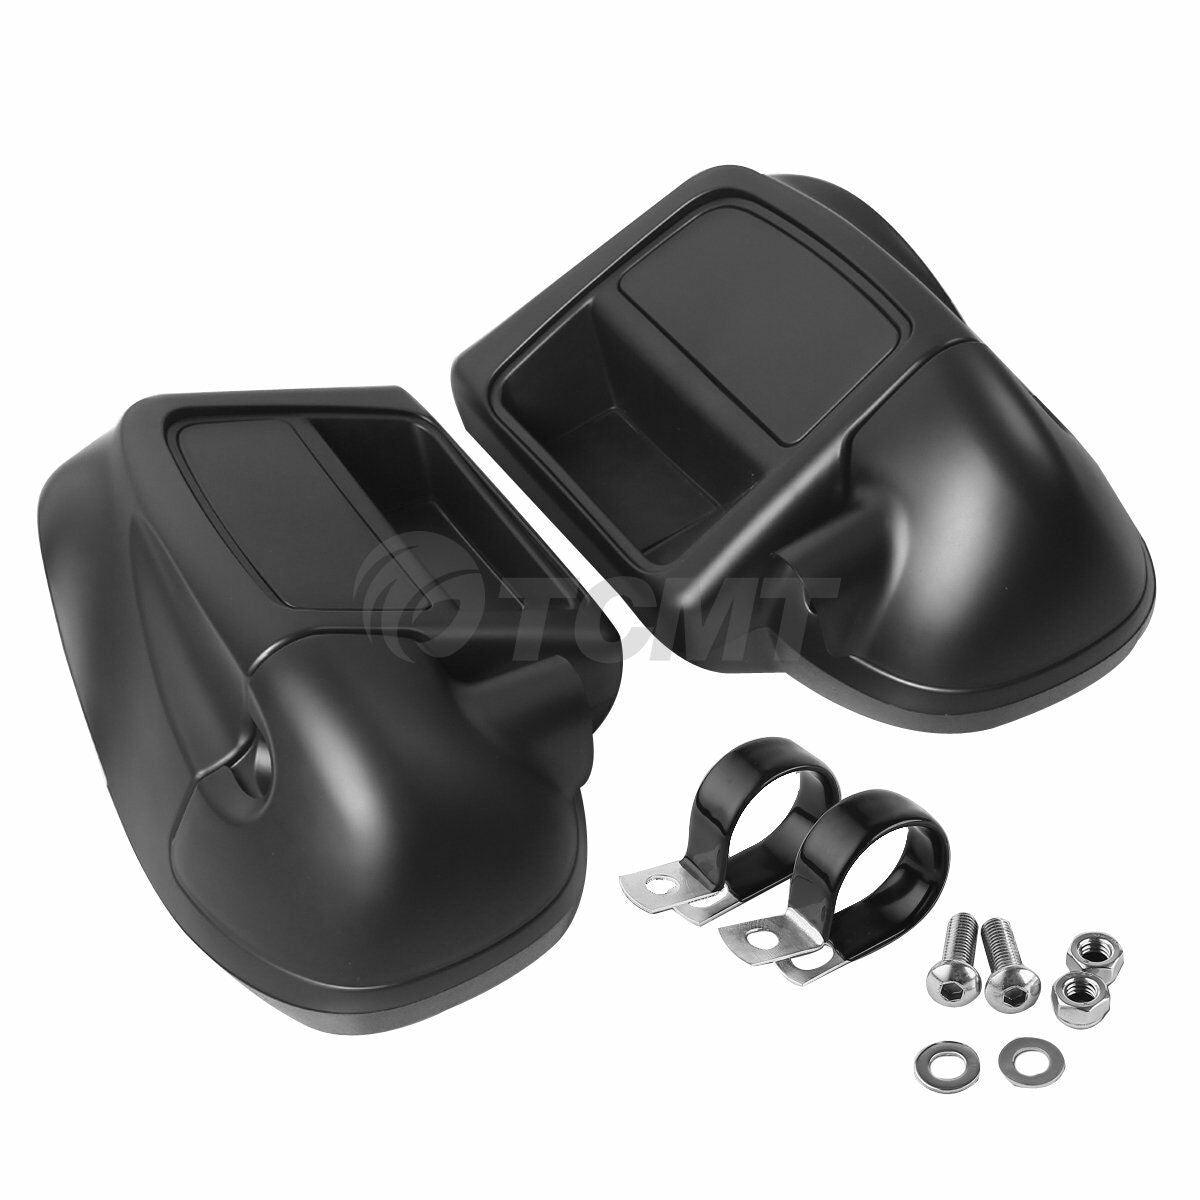 Lower Vented Leg Fairings Glove Box For Harley Touring Electra Street Glide 14+ - Moto Life Products